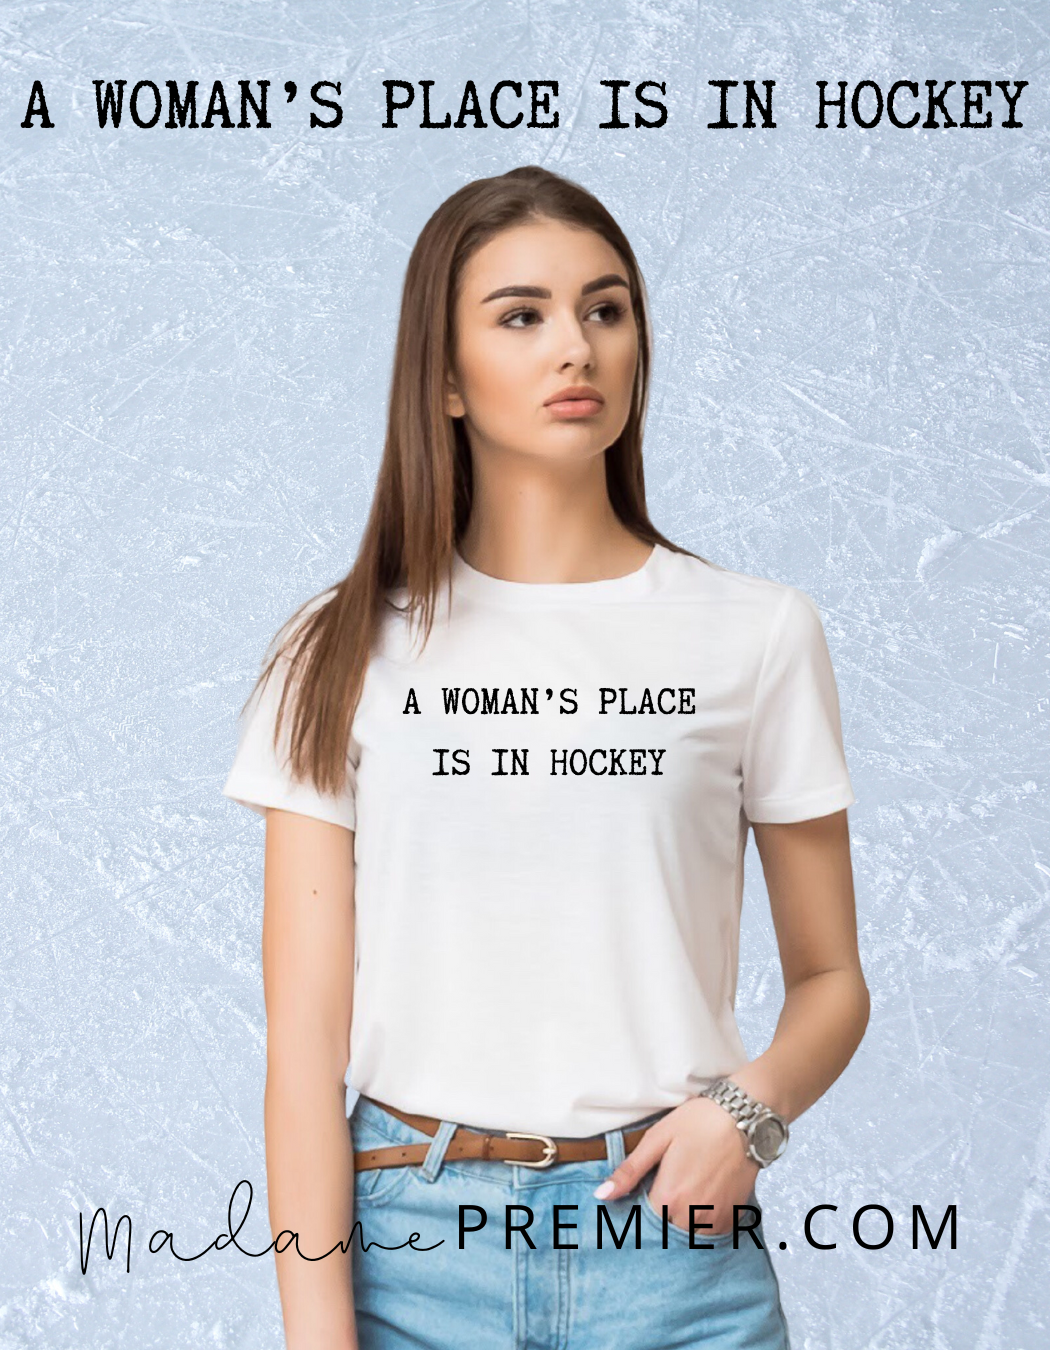 Madame Premier A Woman’s Place Is In Hockey Adult T-Shirt